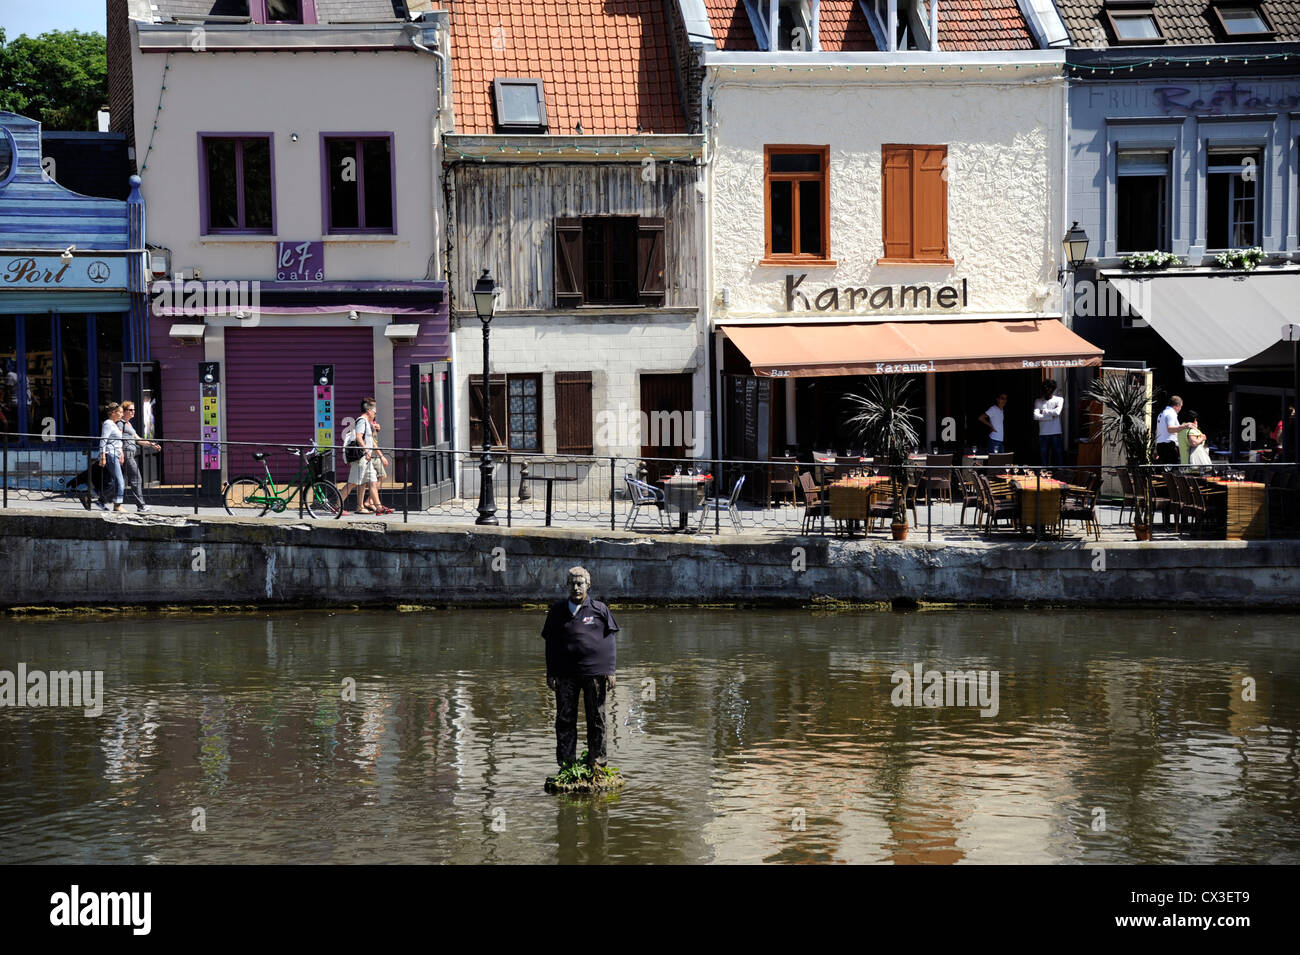 Restaurant, Somme River, Amiens, Somme, Picardie, Frankreich Stockfoto